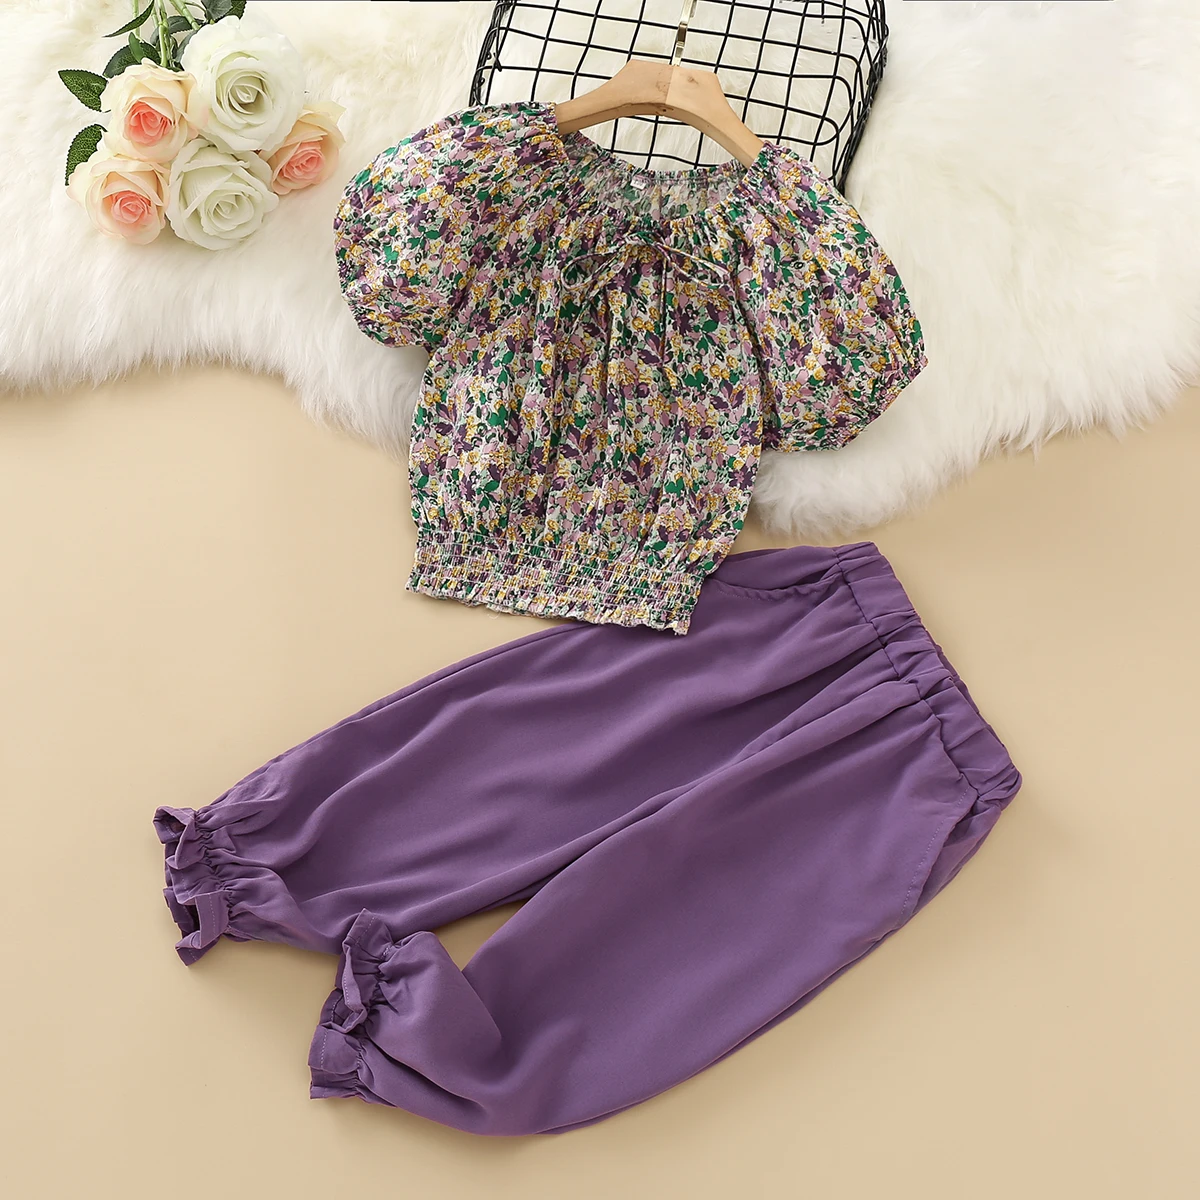 

Floral Chiffon Suit for Girls Sets Summer Teenagers Kids Clothes Shirt & Pants Girl Outfit Baby Children Costumes 6 8 10 12Years